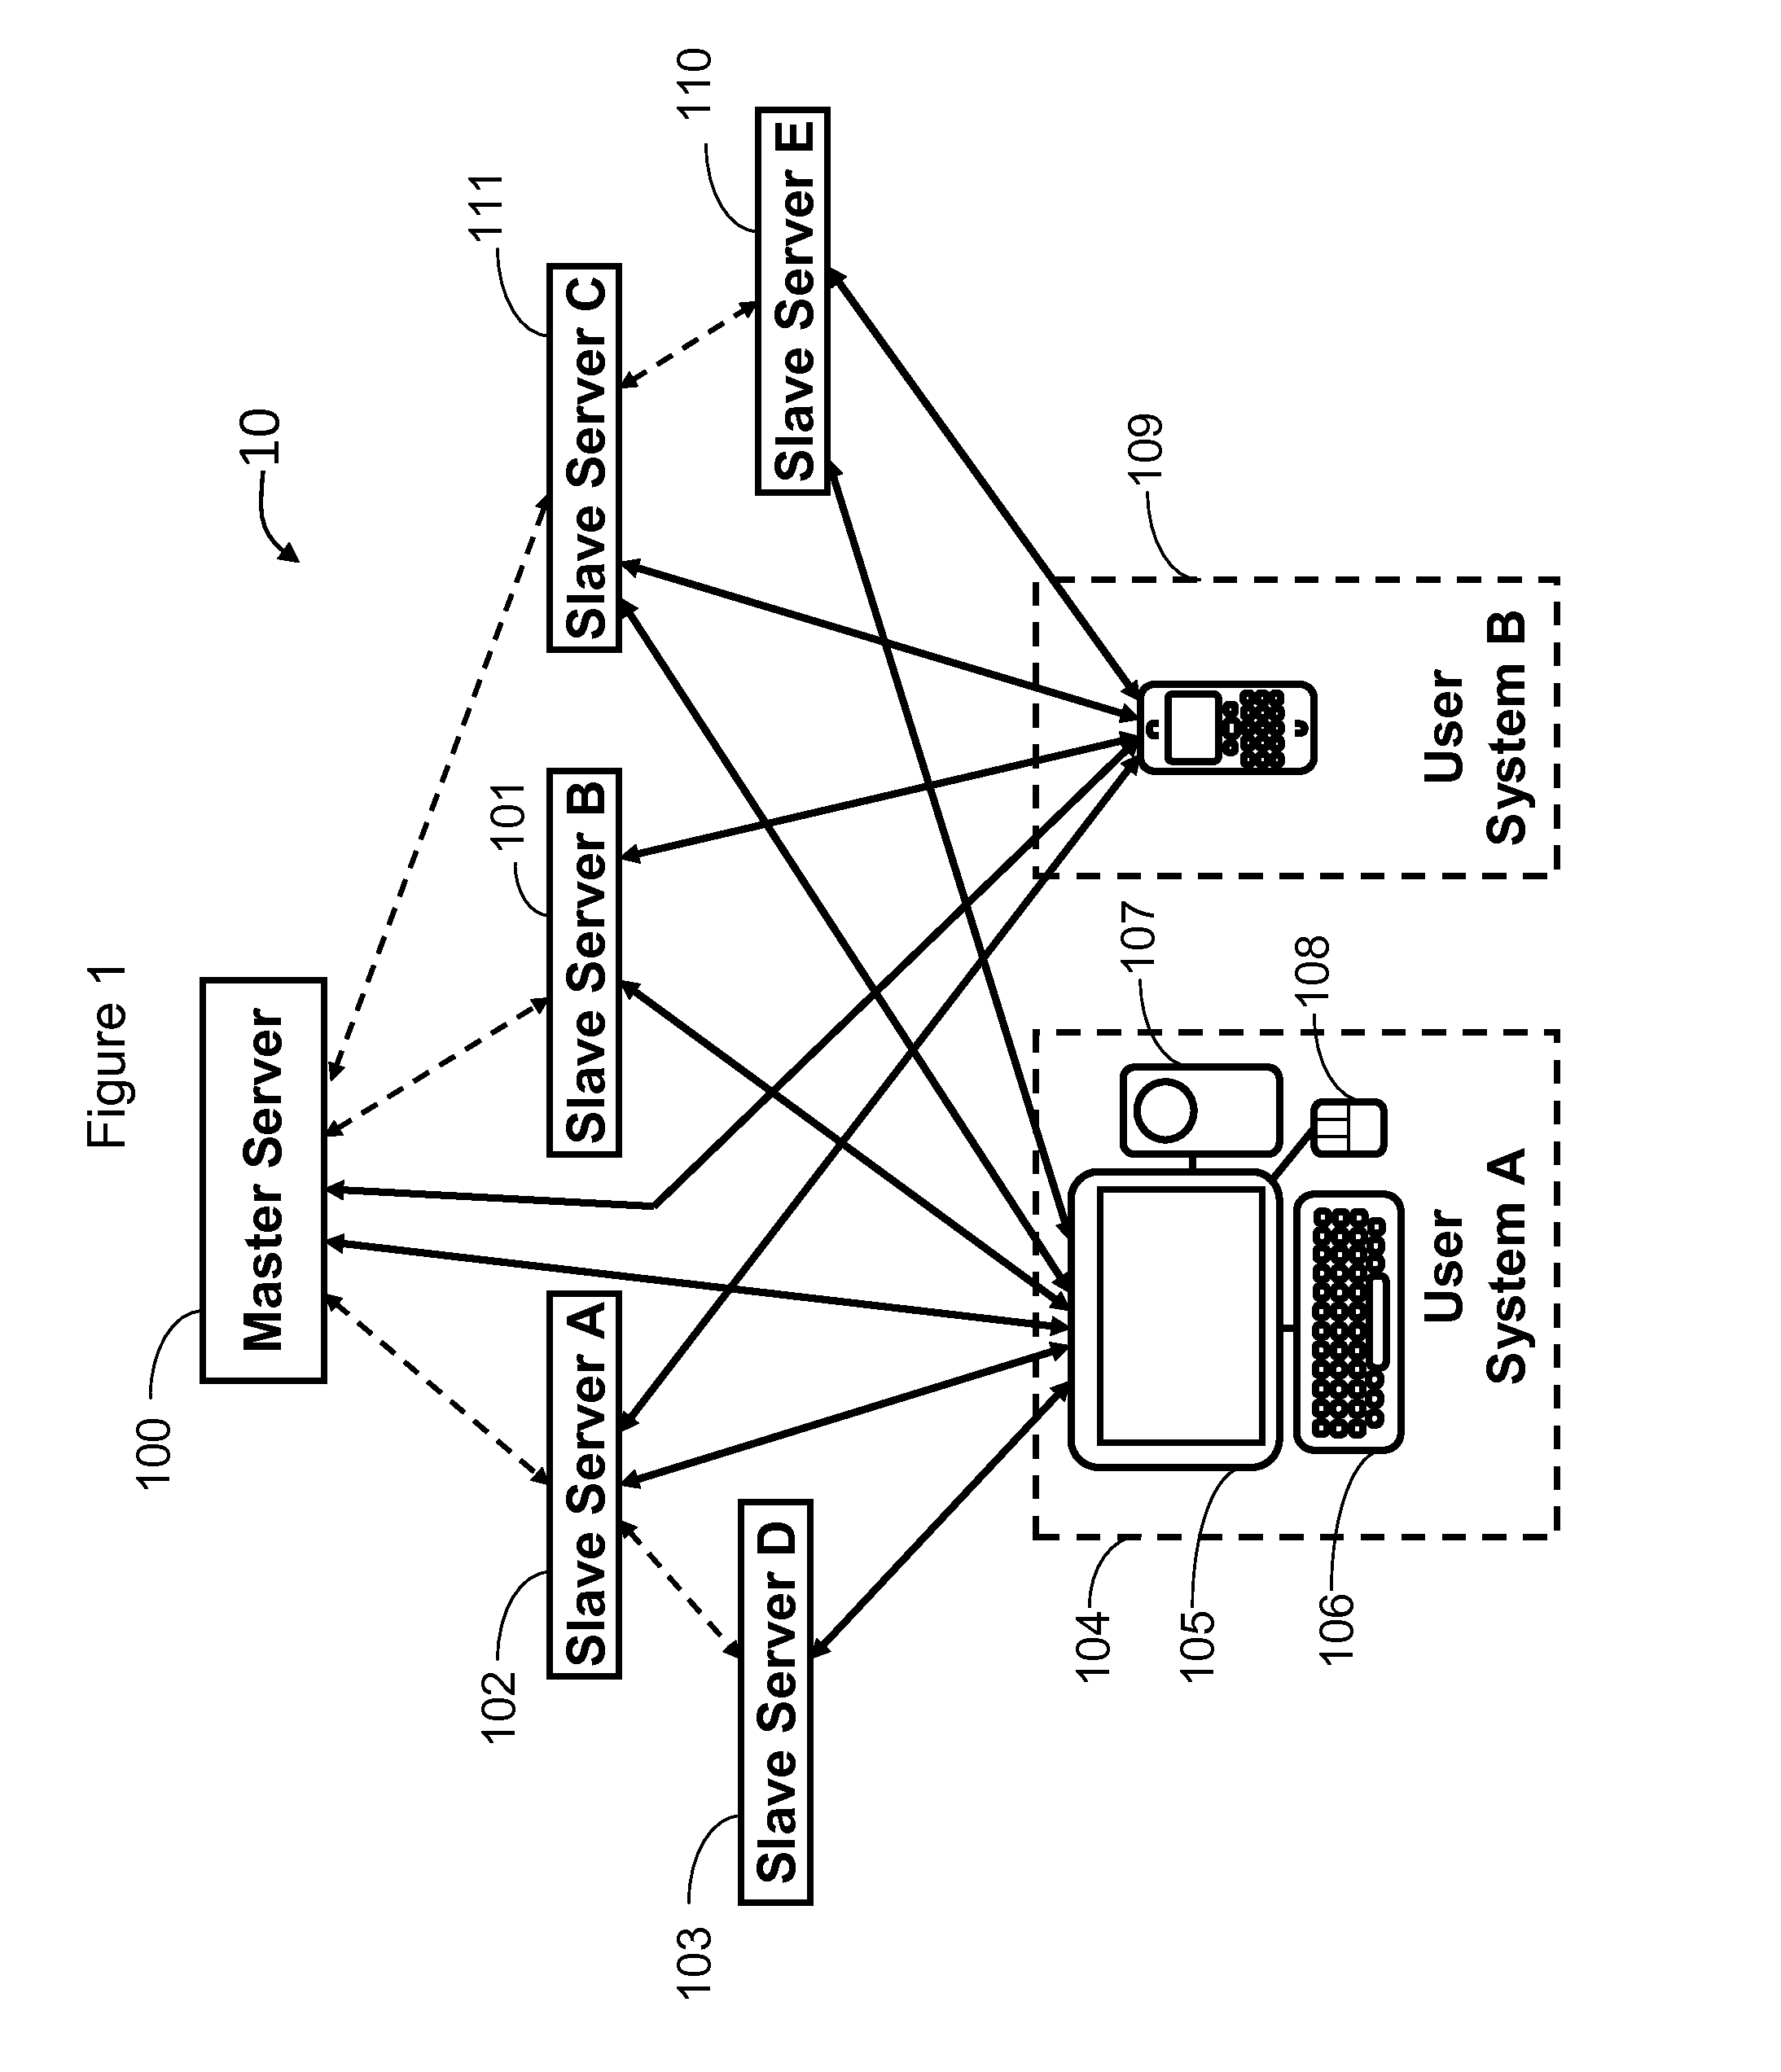 Hierarchical display-server system and method